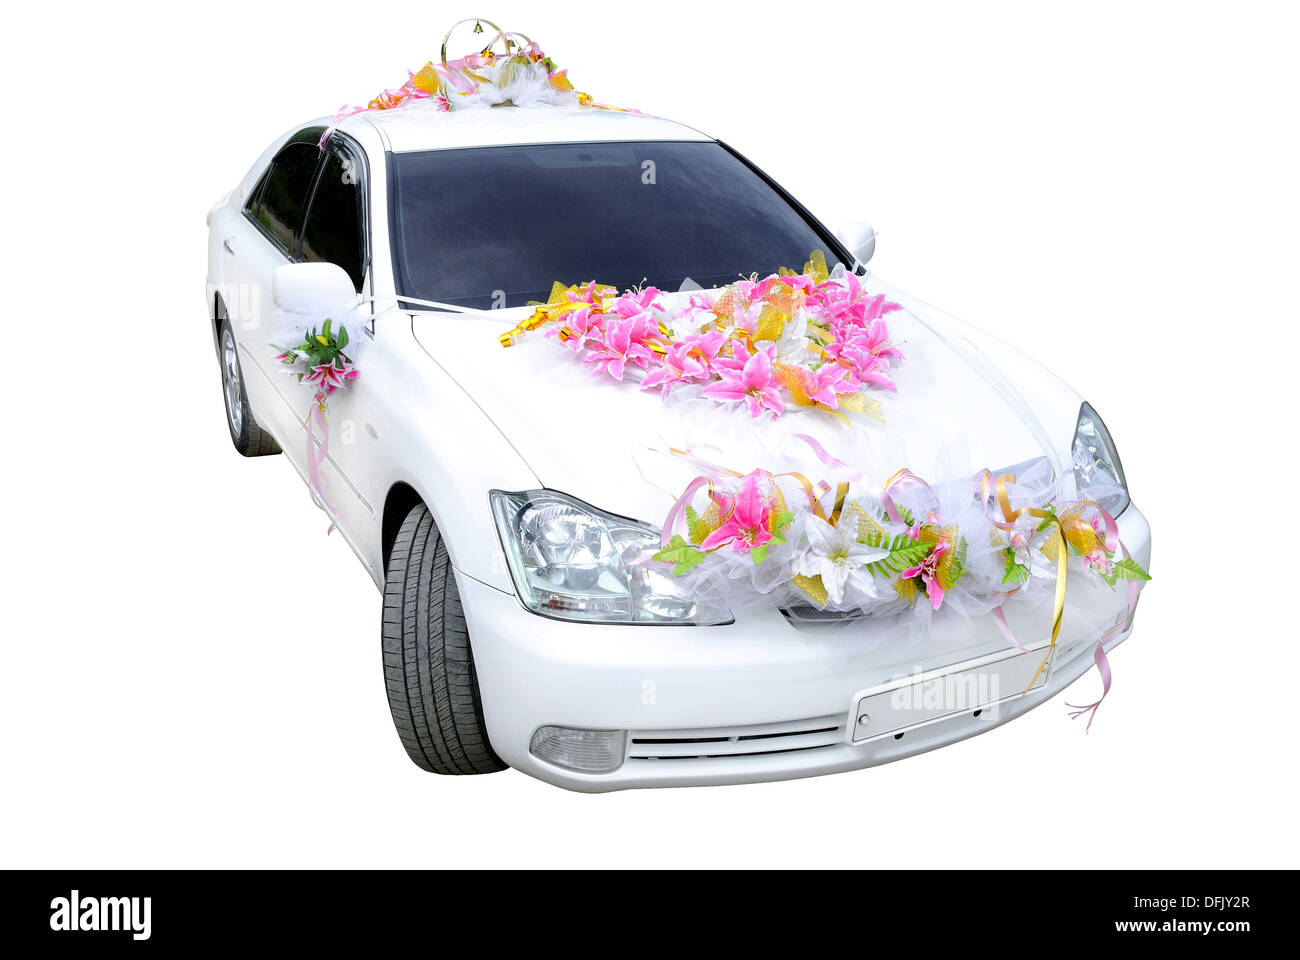 The white wedding car decorated with flowers on a white background. Stock Photo